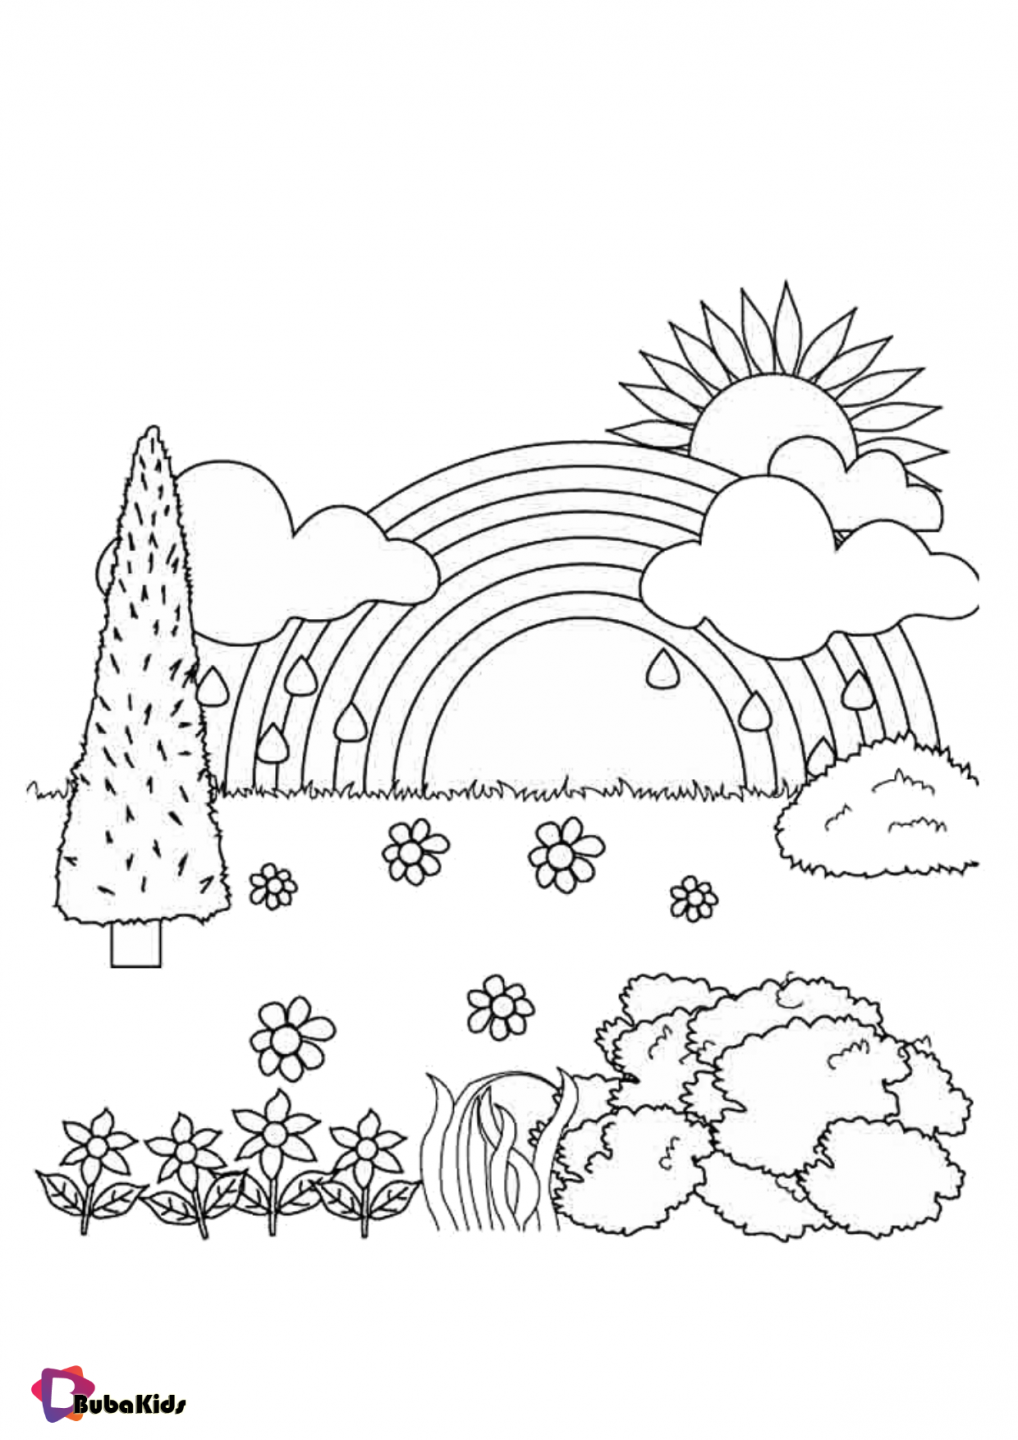 rainbow sun cloud tree and flowers coloring pages